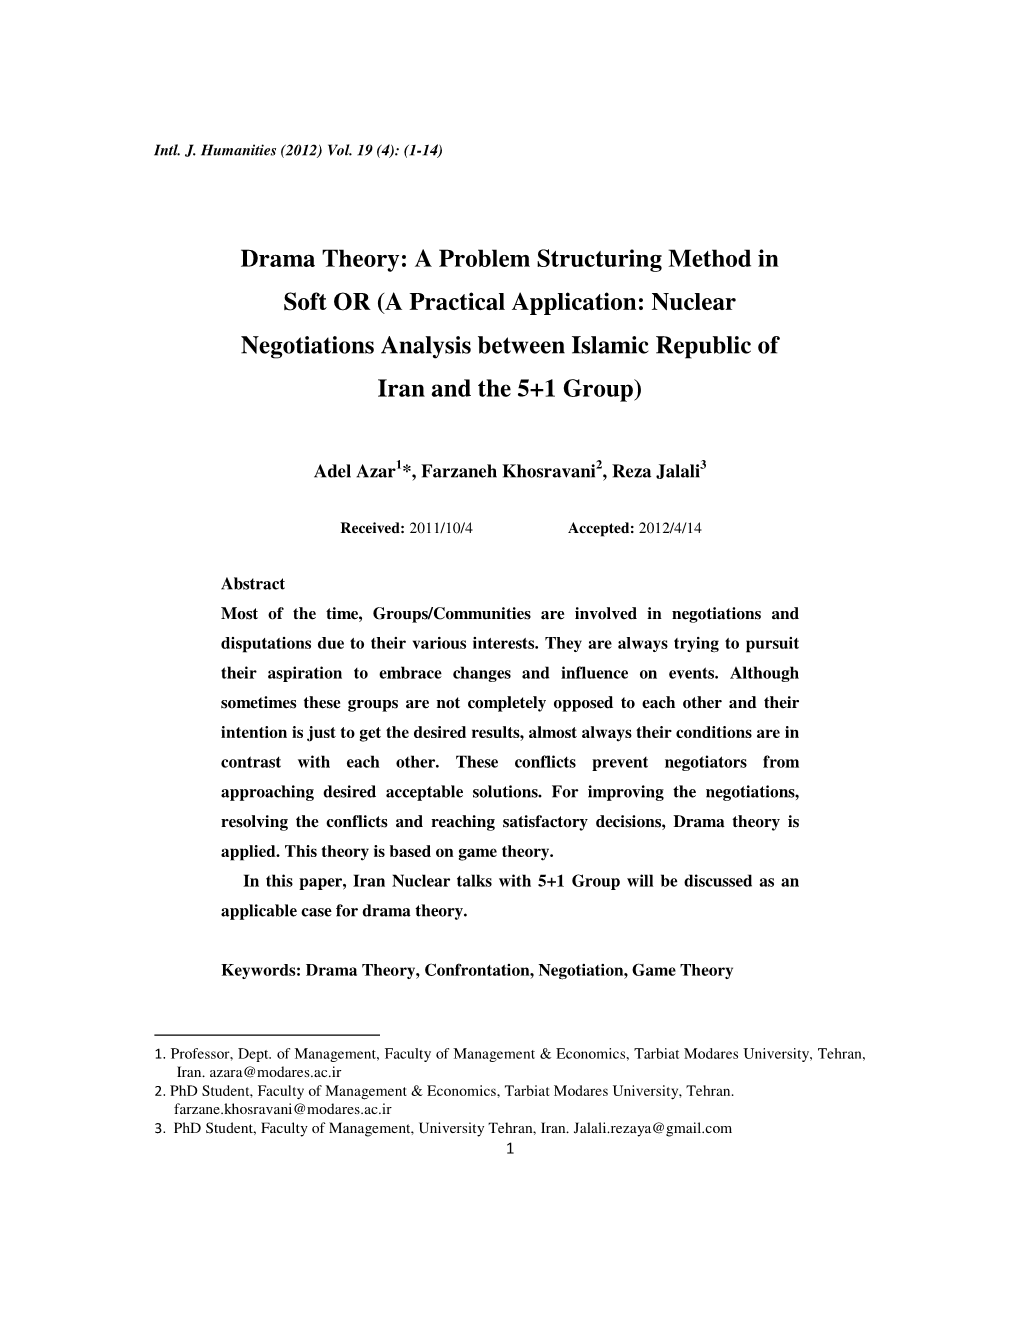 Drama Theory: a Problem Structuring Method in Soft OR (A Practical Application: Nuclear Negotiations Analysis Between Islamic Republic of Iran and the 5+1 Group)